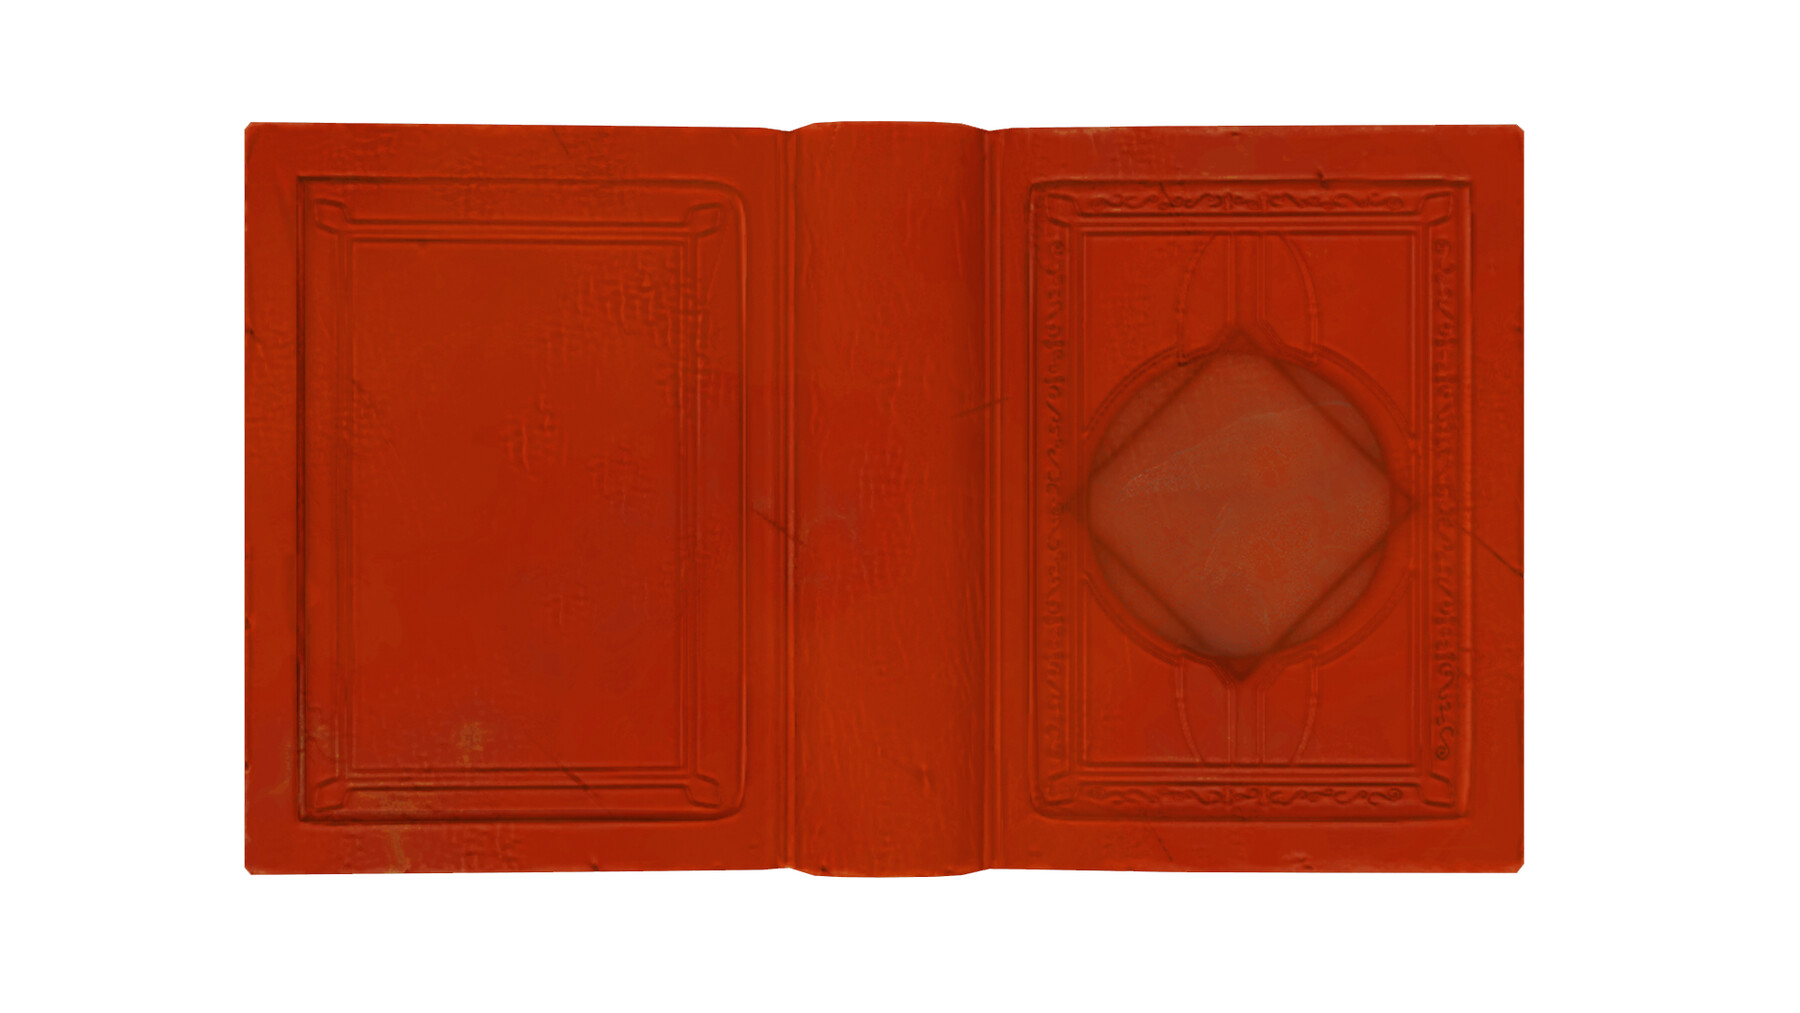 ArtStation - Old Leather Book With Animation